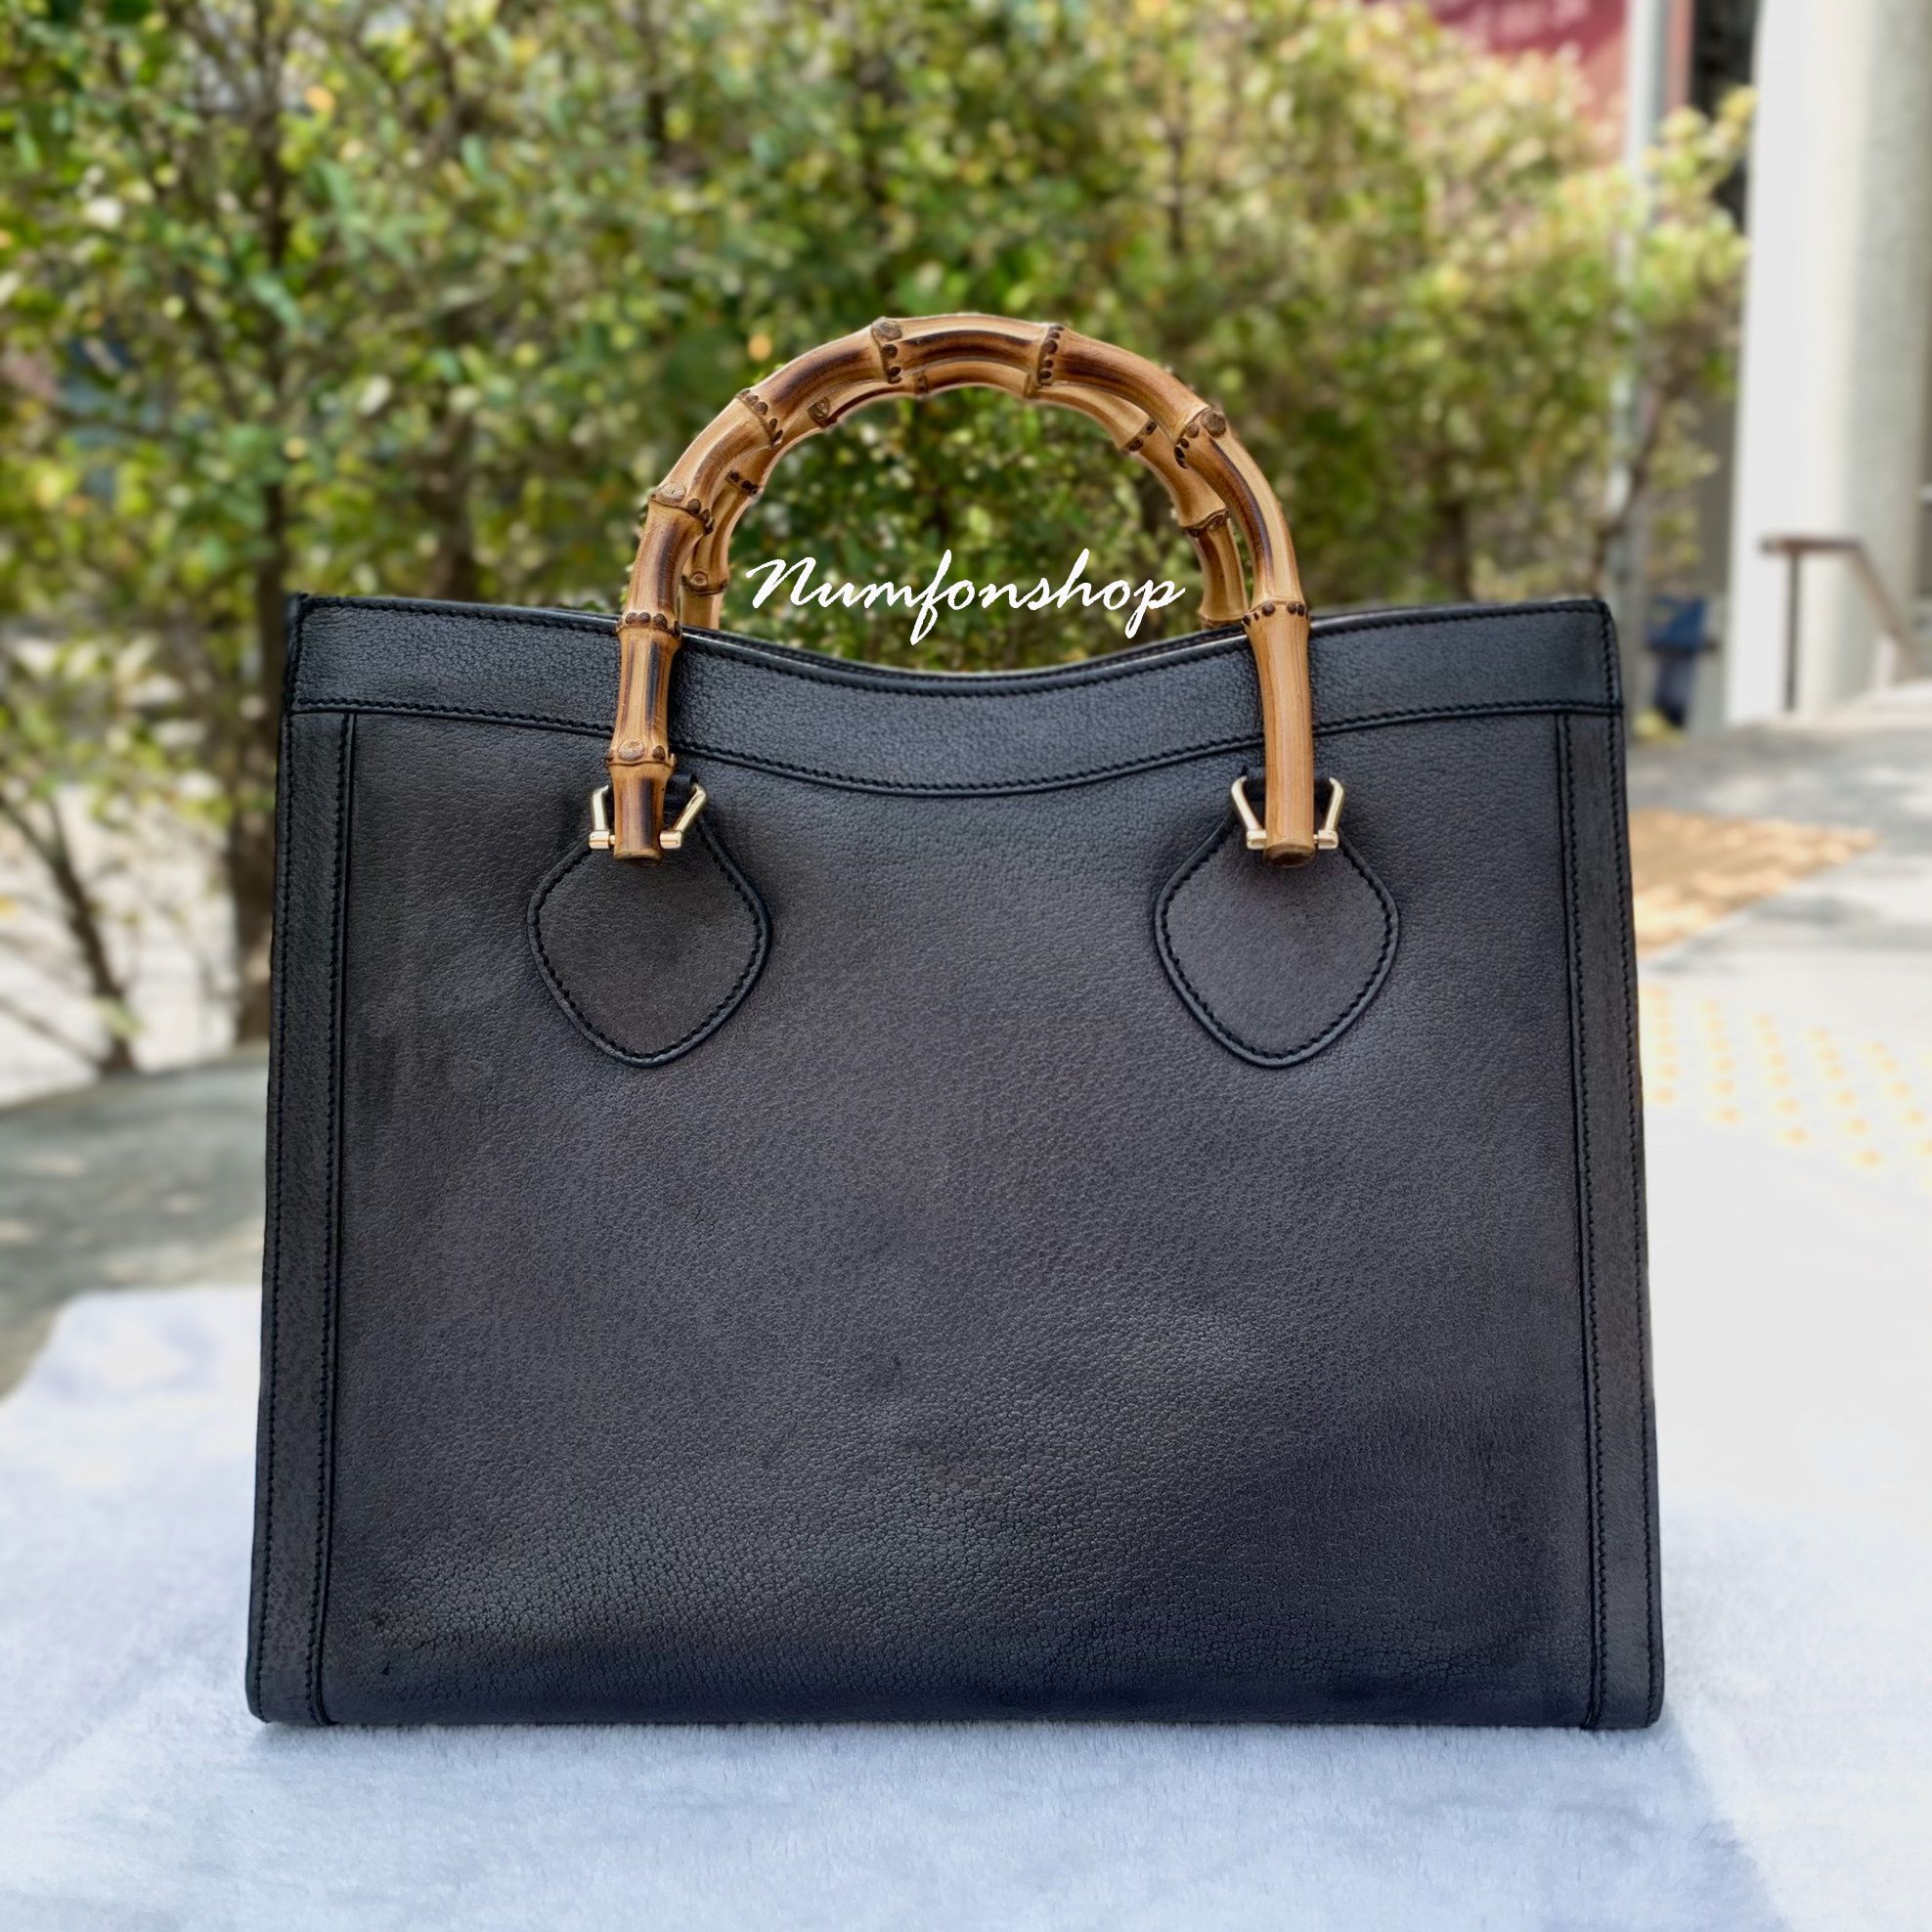 Sold Gucci Vintage Bamboo Tote Bag